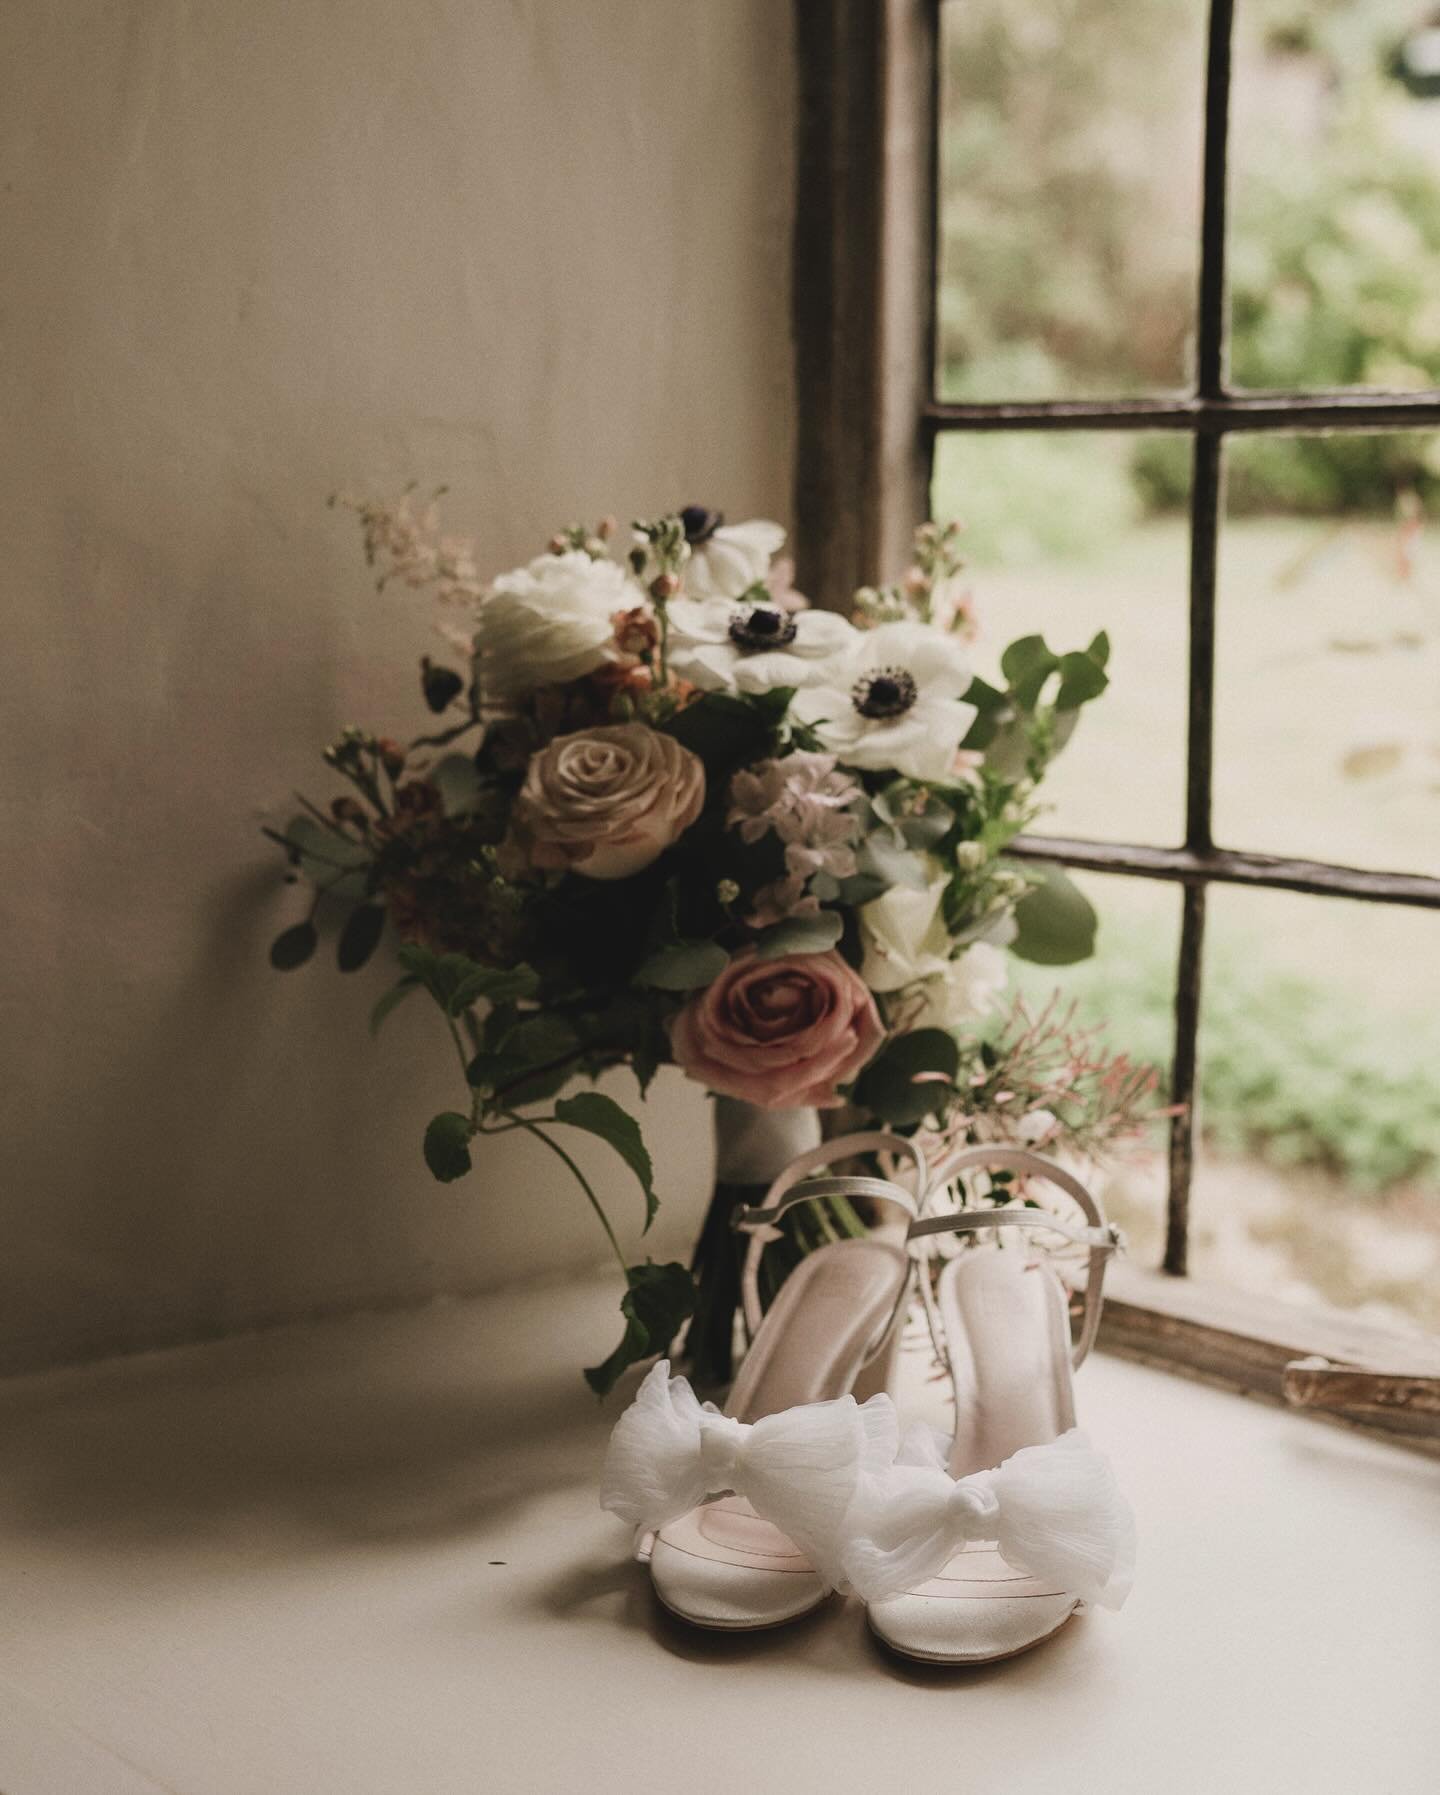 Beautiful bridal details... swipe for a close up on the perfect spring bouquet of anemones, stocks and ranunculus 
Photography by @nicolastreaderphotography
.
.
#springbridalflowers #bridalbouquet #Dorsetweddingflorist #bridaldetails #weddingflowersi